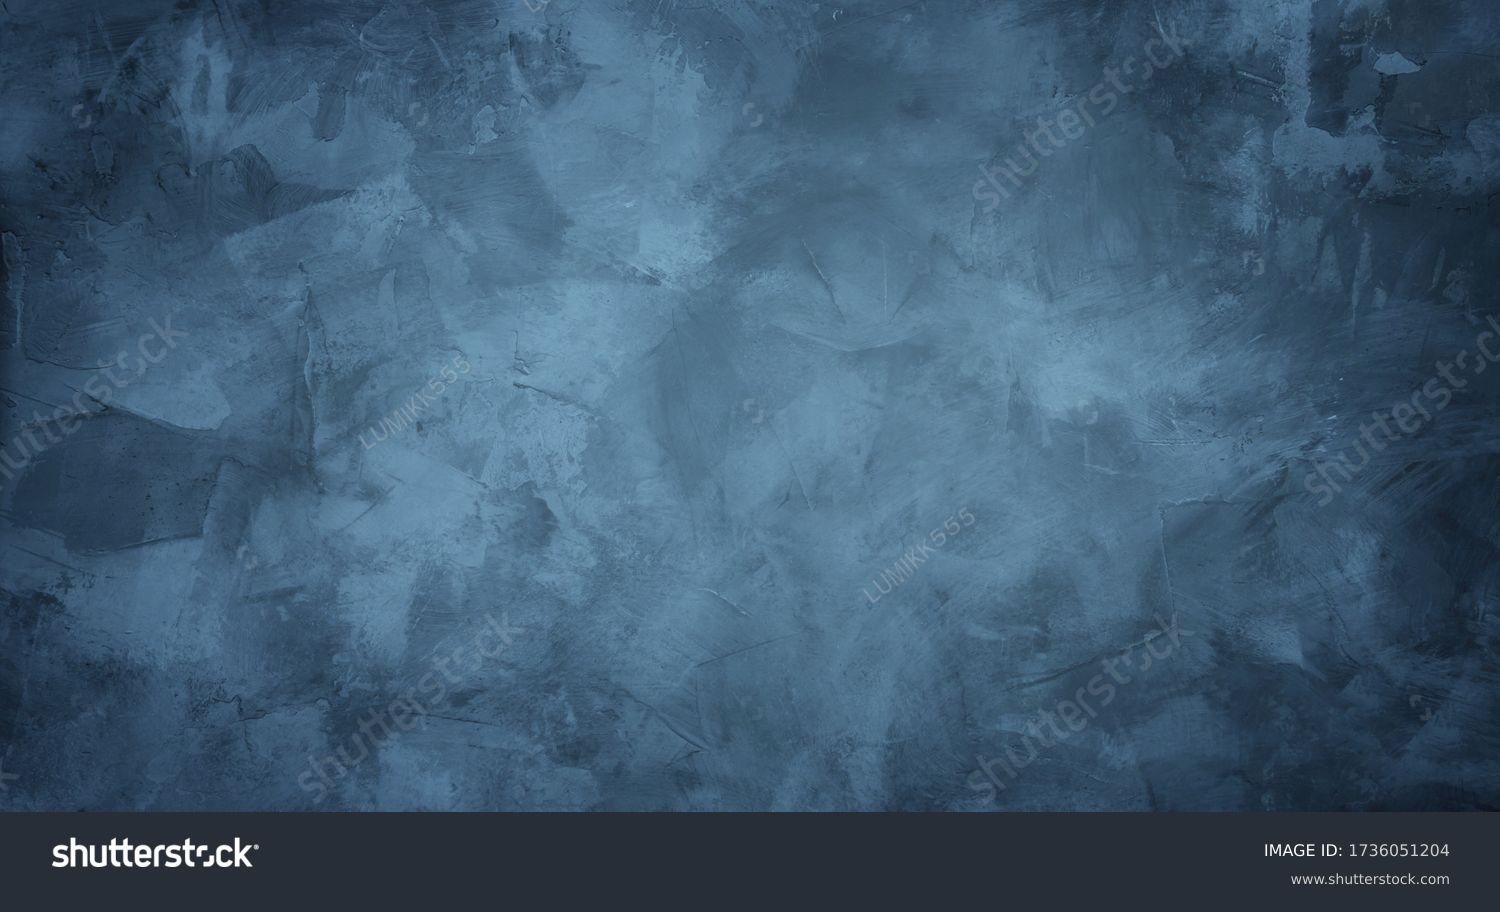 Beautiful grunge grey blue background. Panoramic abstract decorative dark background. Wide angle rough stylized mystic texture wallpaper with copy space for design. #1736051204